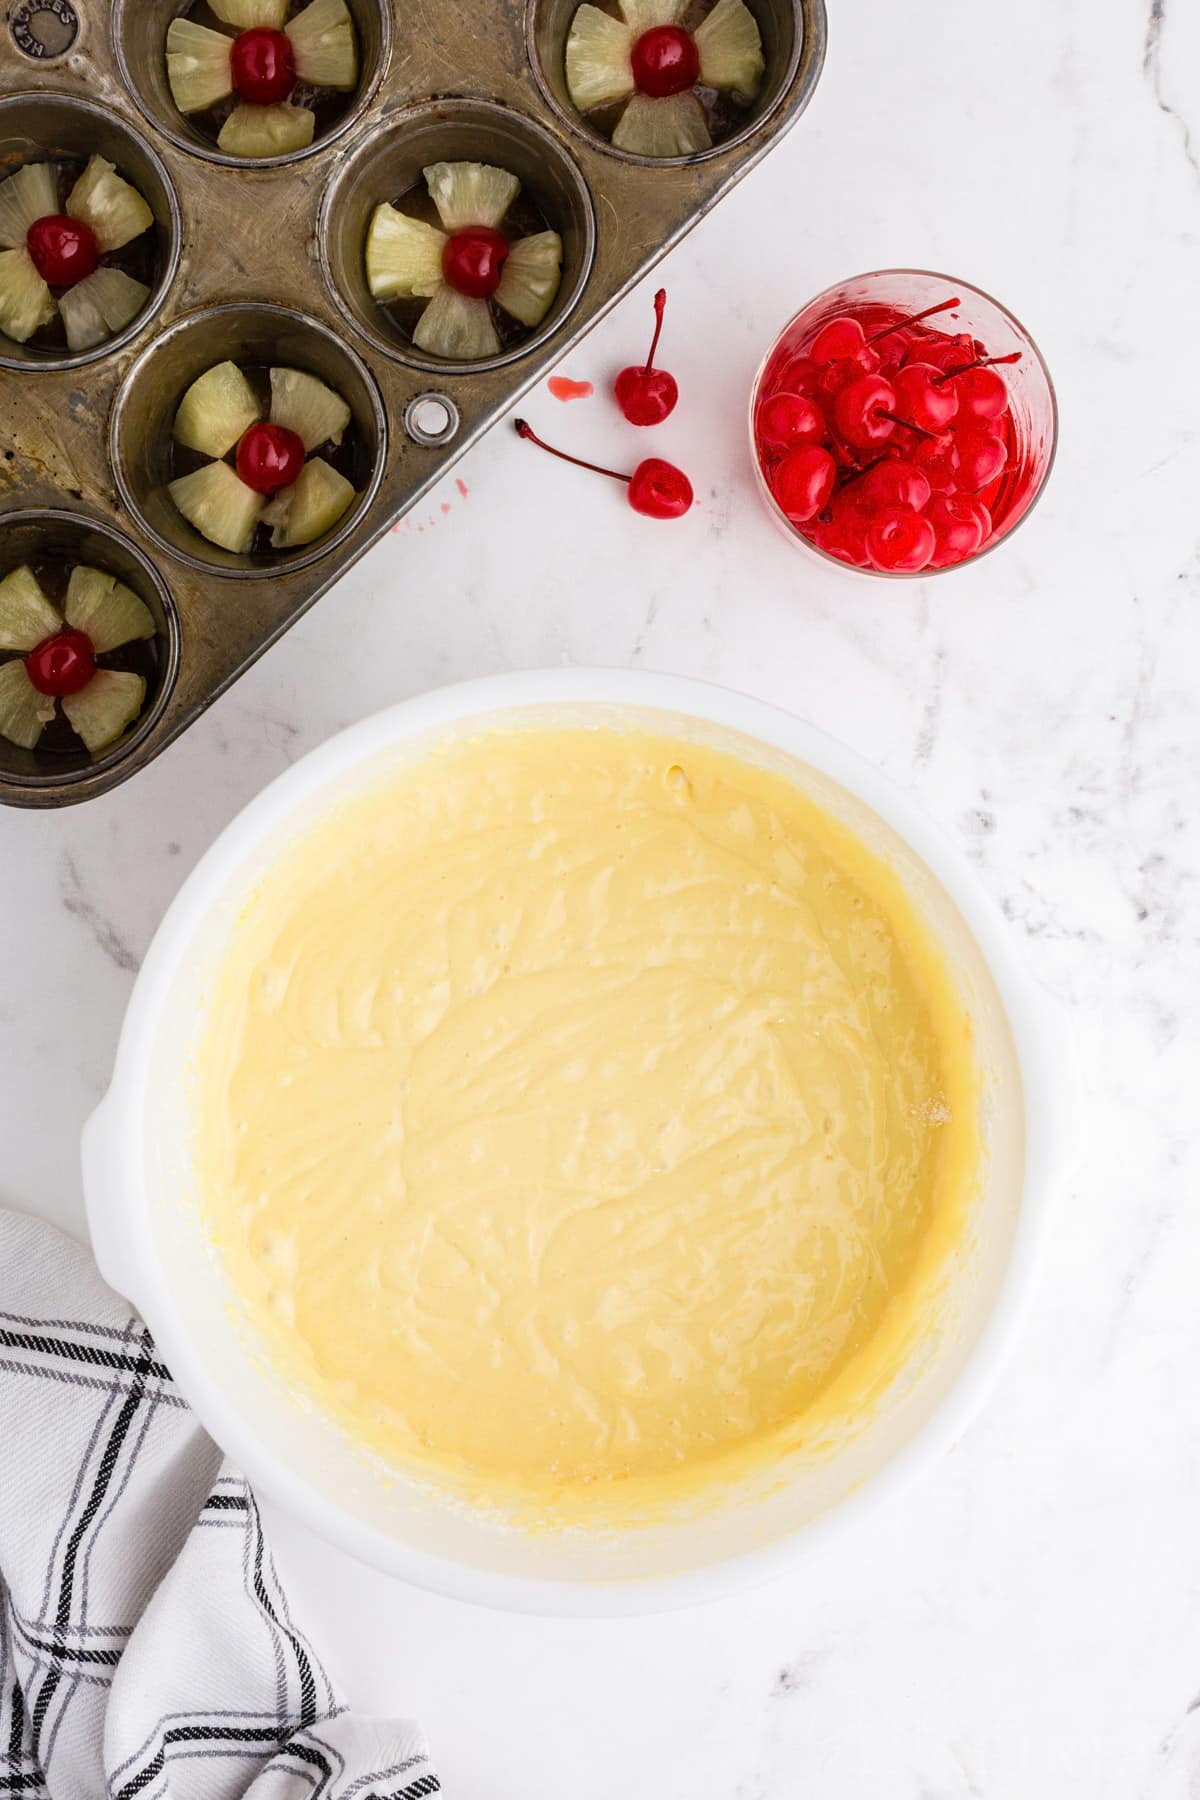 Pineapple upside down cake batter in a large mixing bowl, pan with assembled pineapple slices and maraschino cherries, on a marble countertop. 